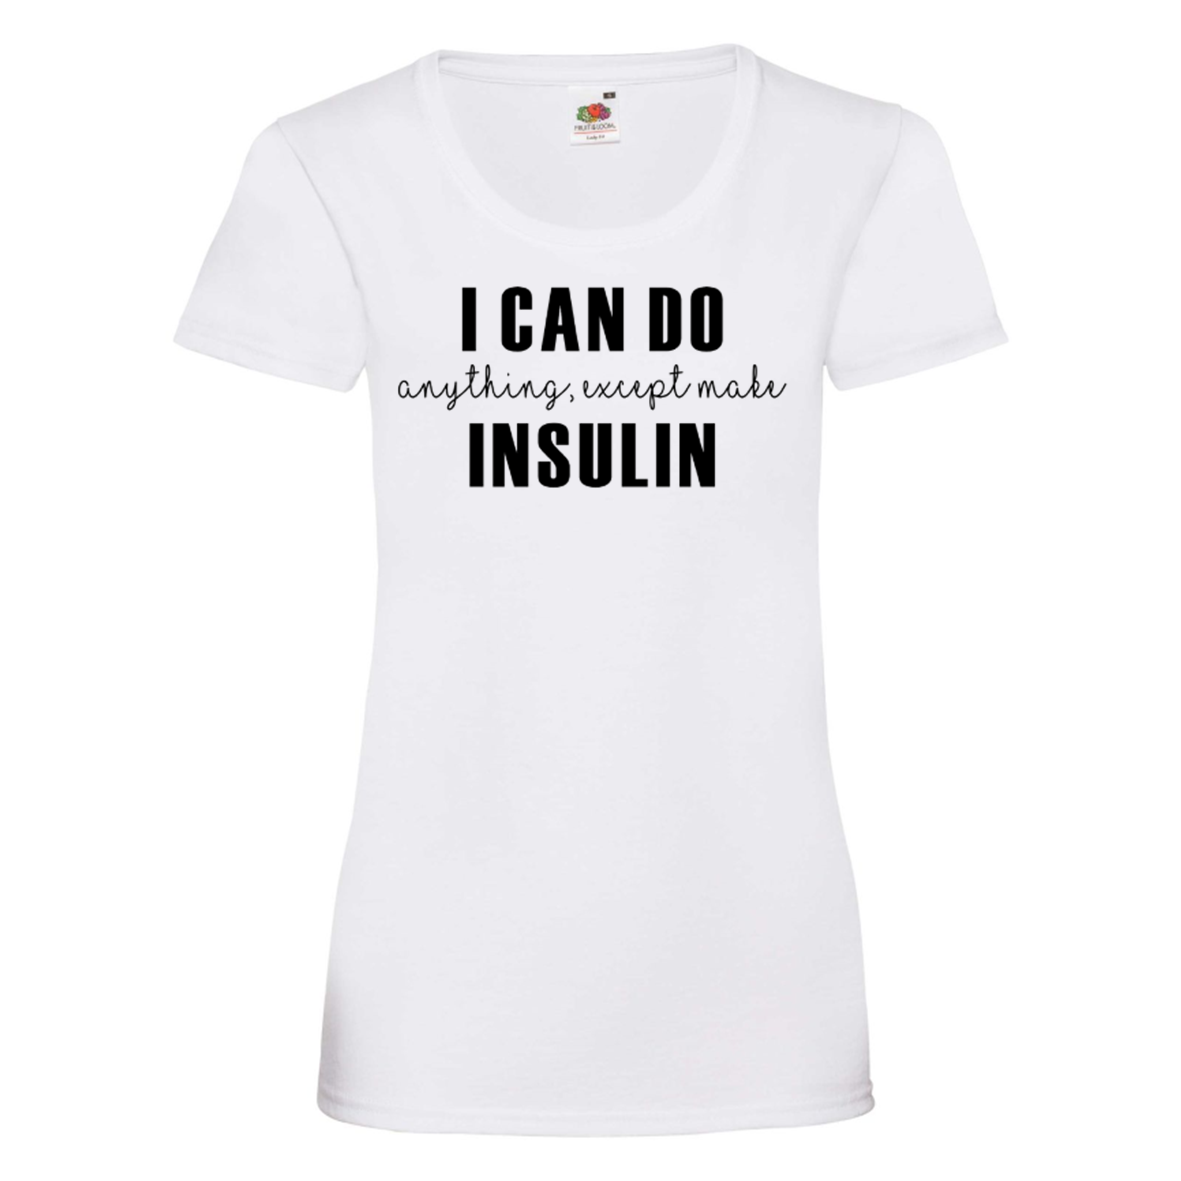 I Can Do Anything, Except Make Insulin Women's T Shirt